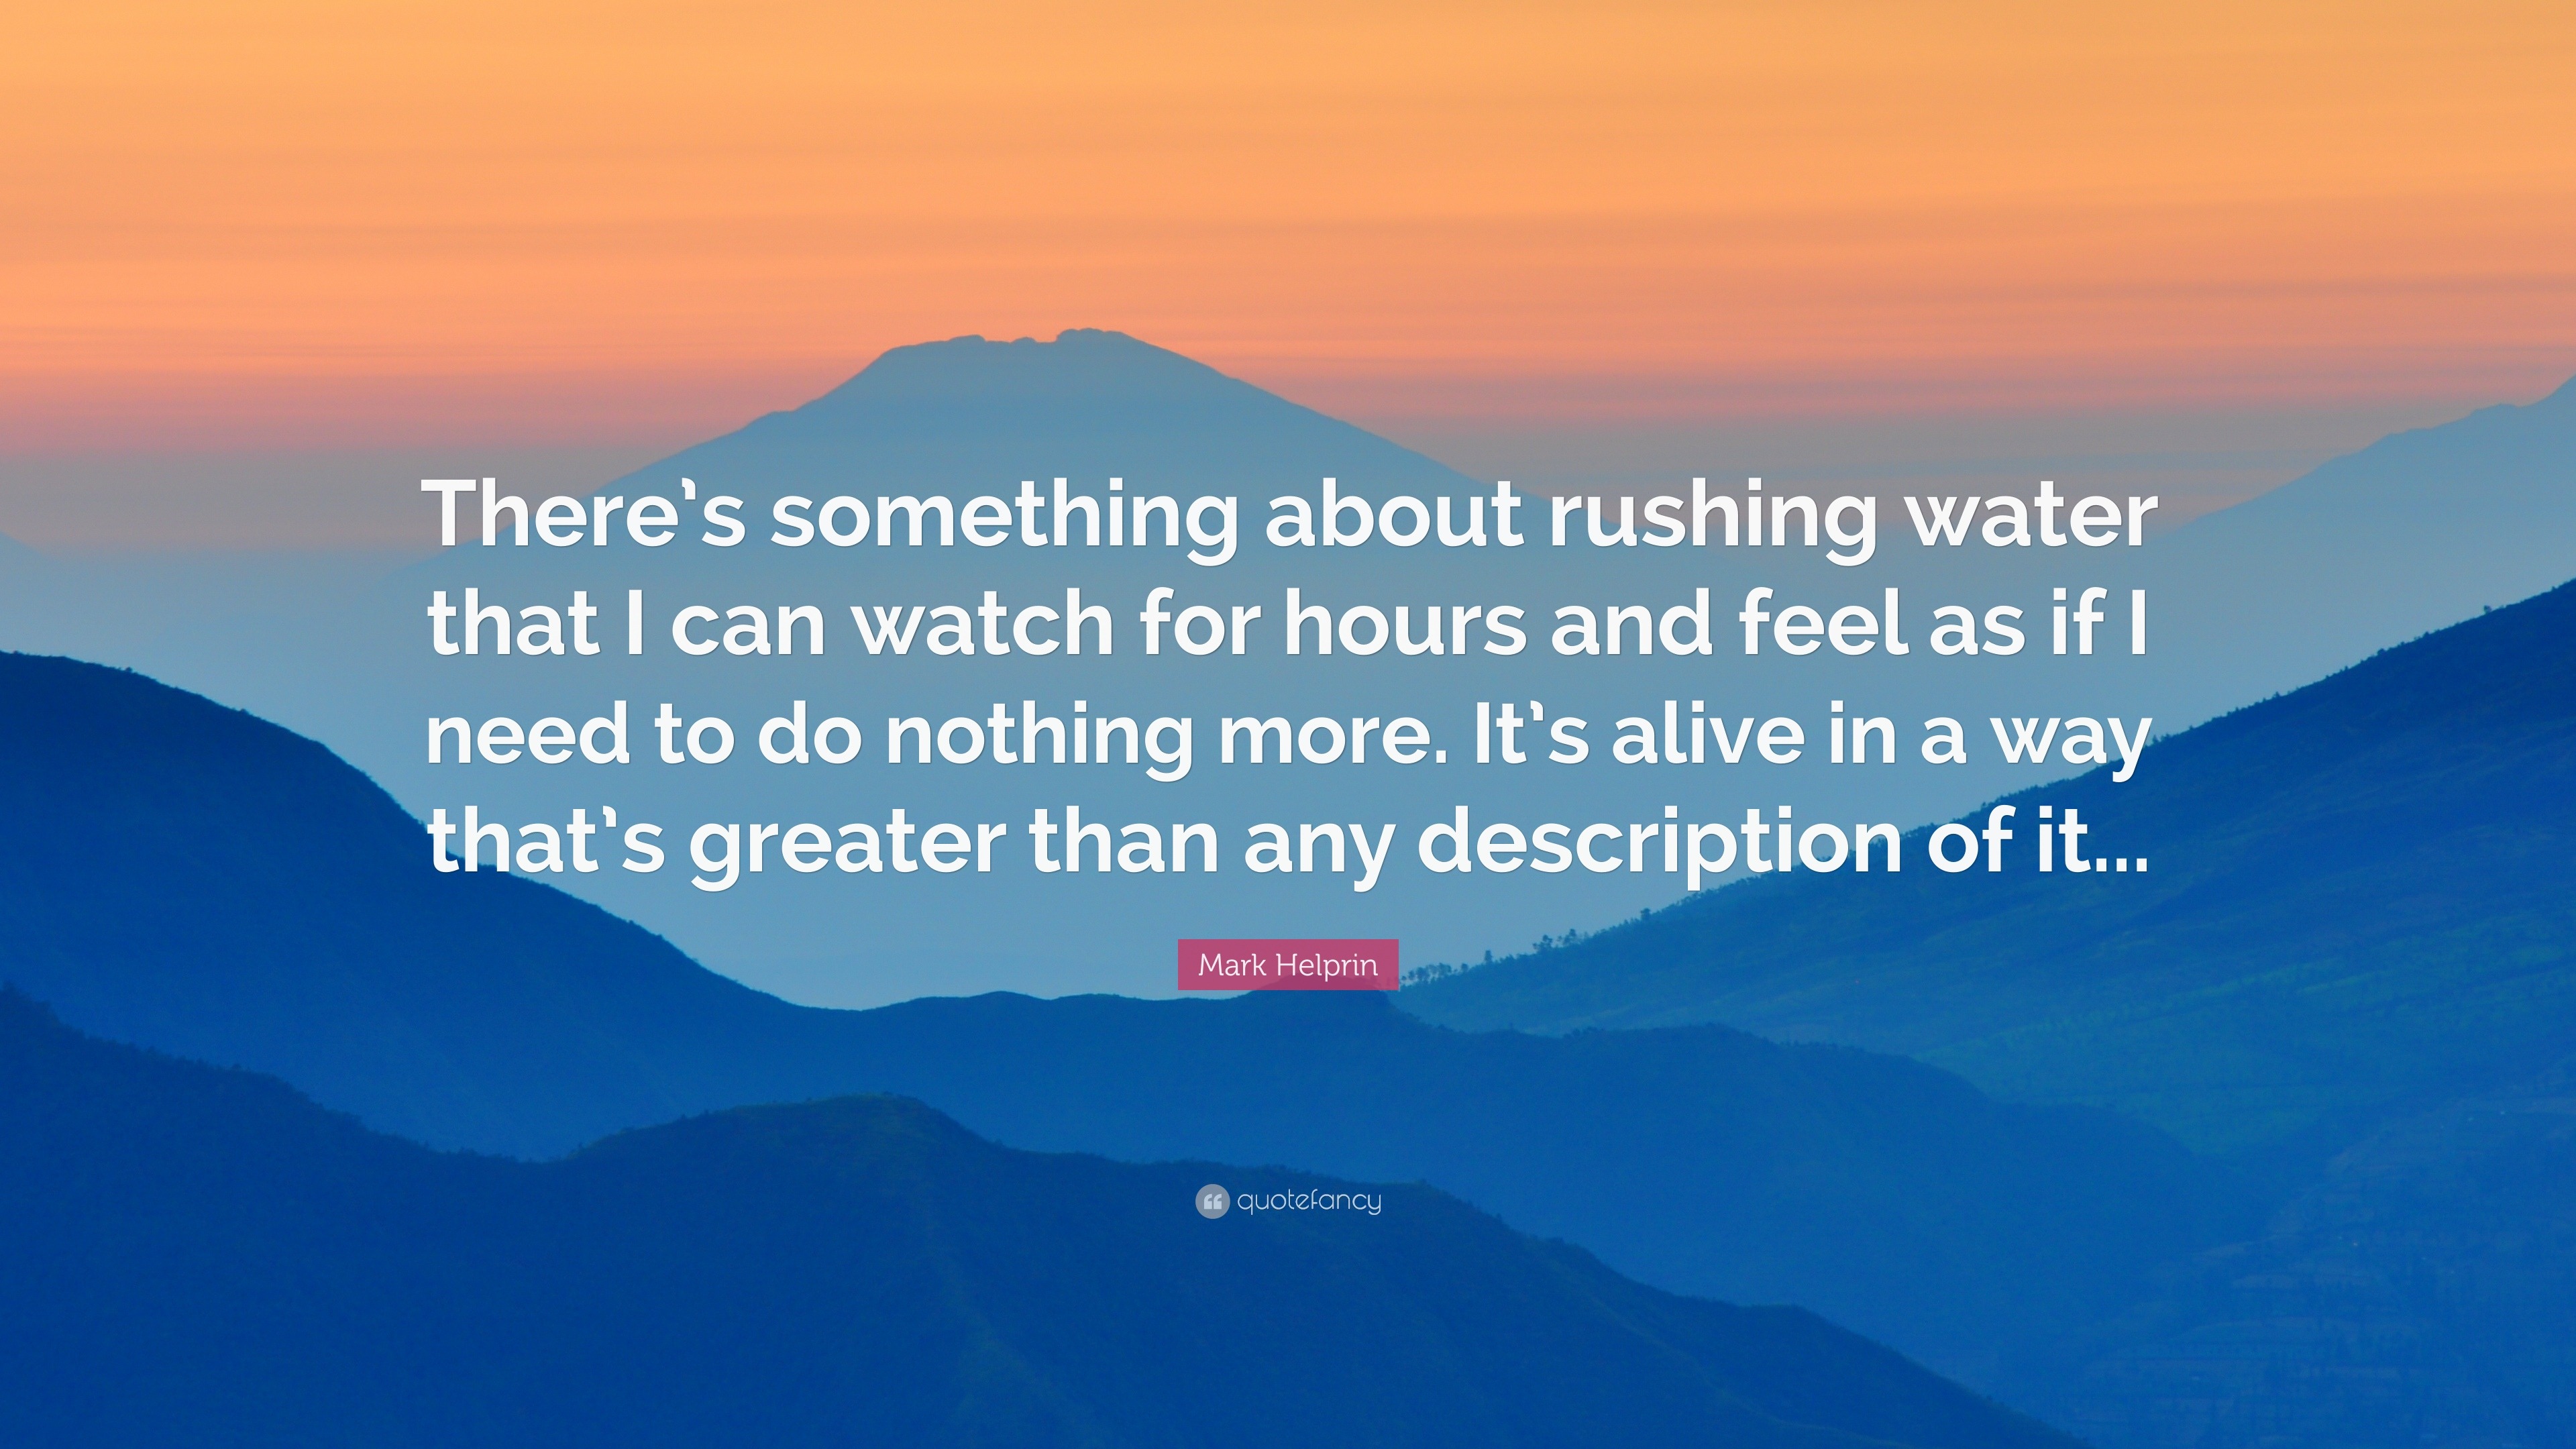 https://quotefancy.com/media/wallpaper/3840x2160/952563-Mark-Helprin-Quote-There-s-something-about-rushing-water-that-I.jpg